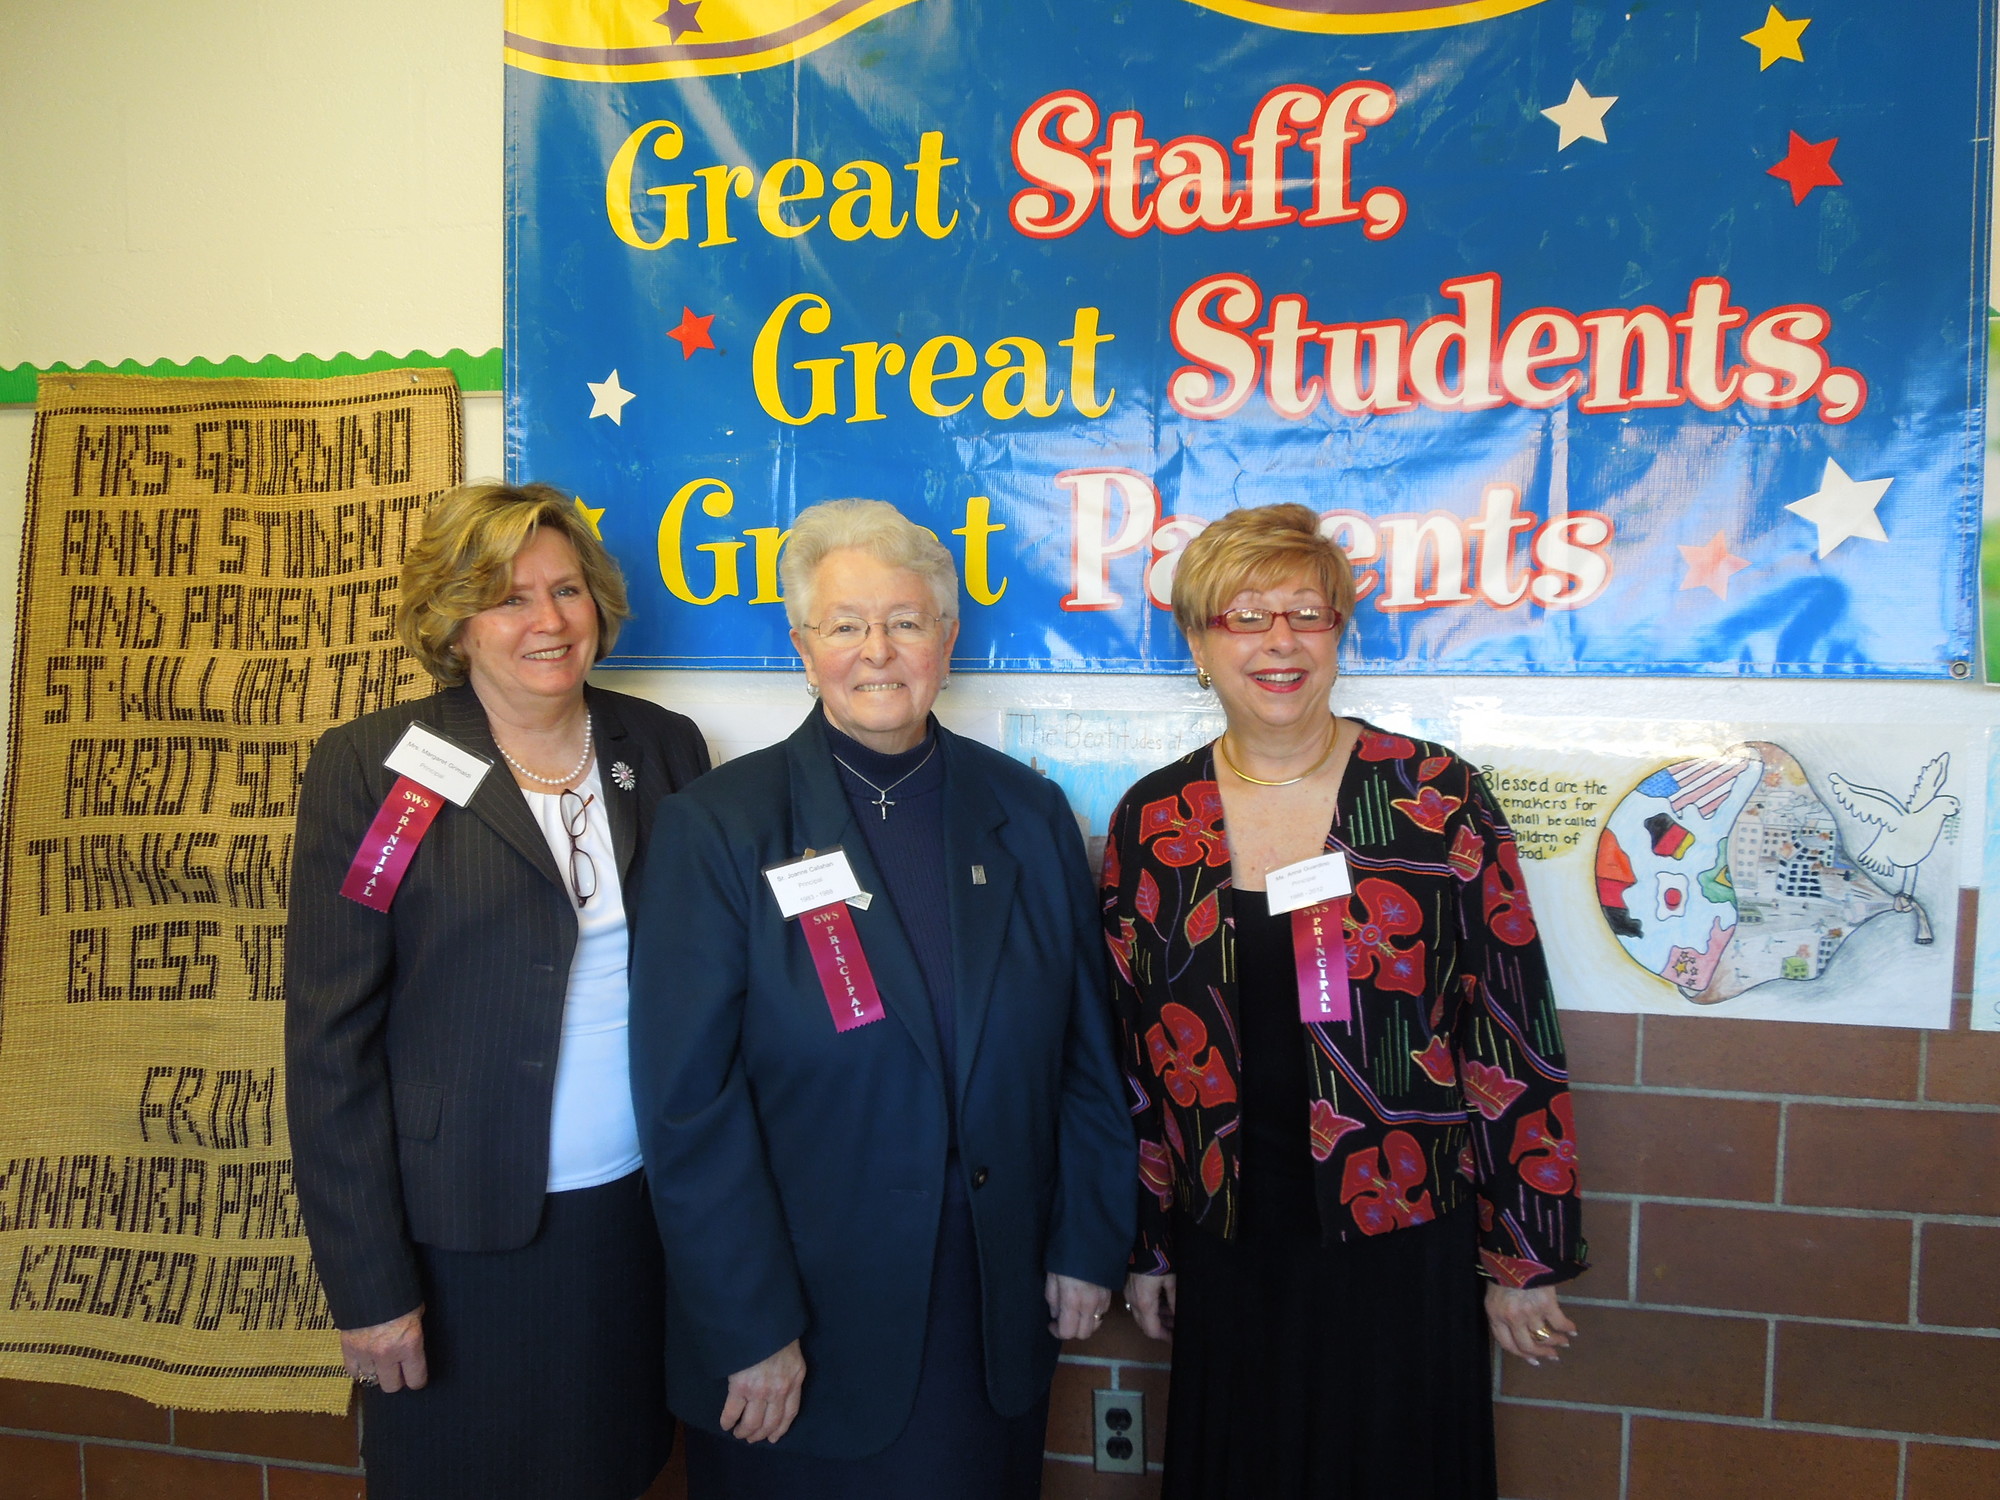 Principal Margaret Grimaldi, left, was joined by past school leaders Sister Joanne Callahan (1983-88) and Anna Guardino (1988-2010).